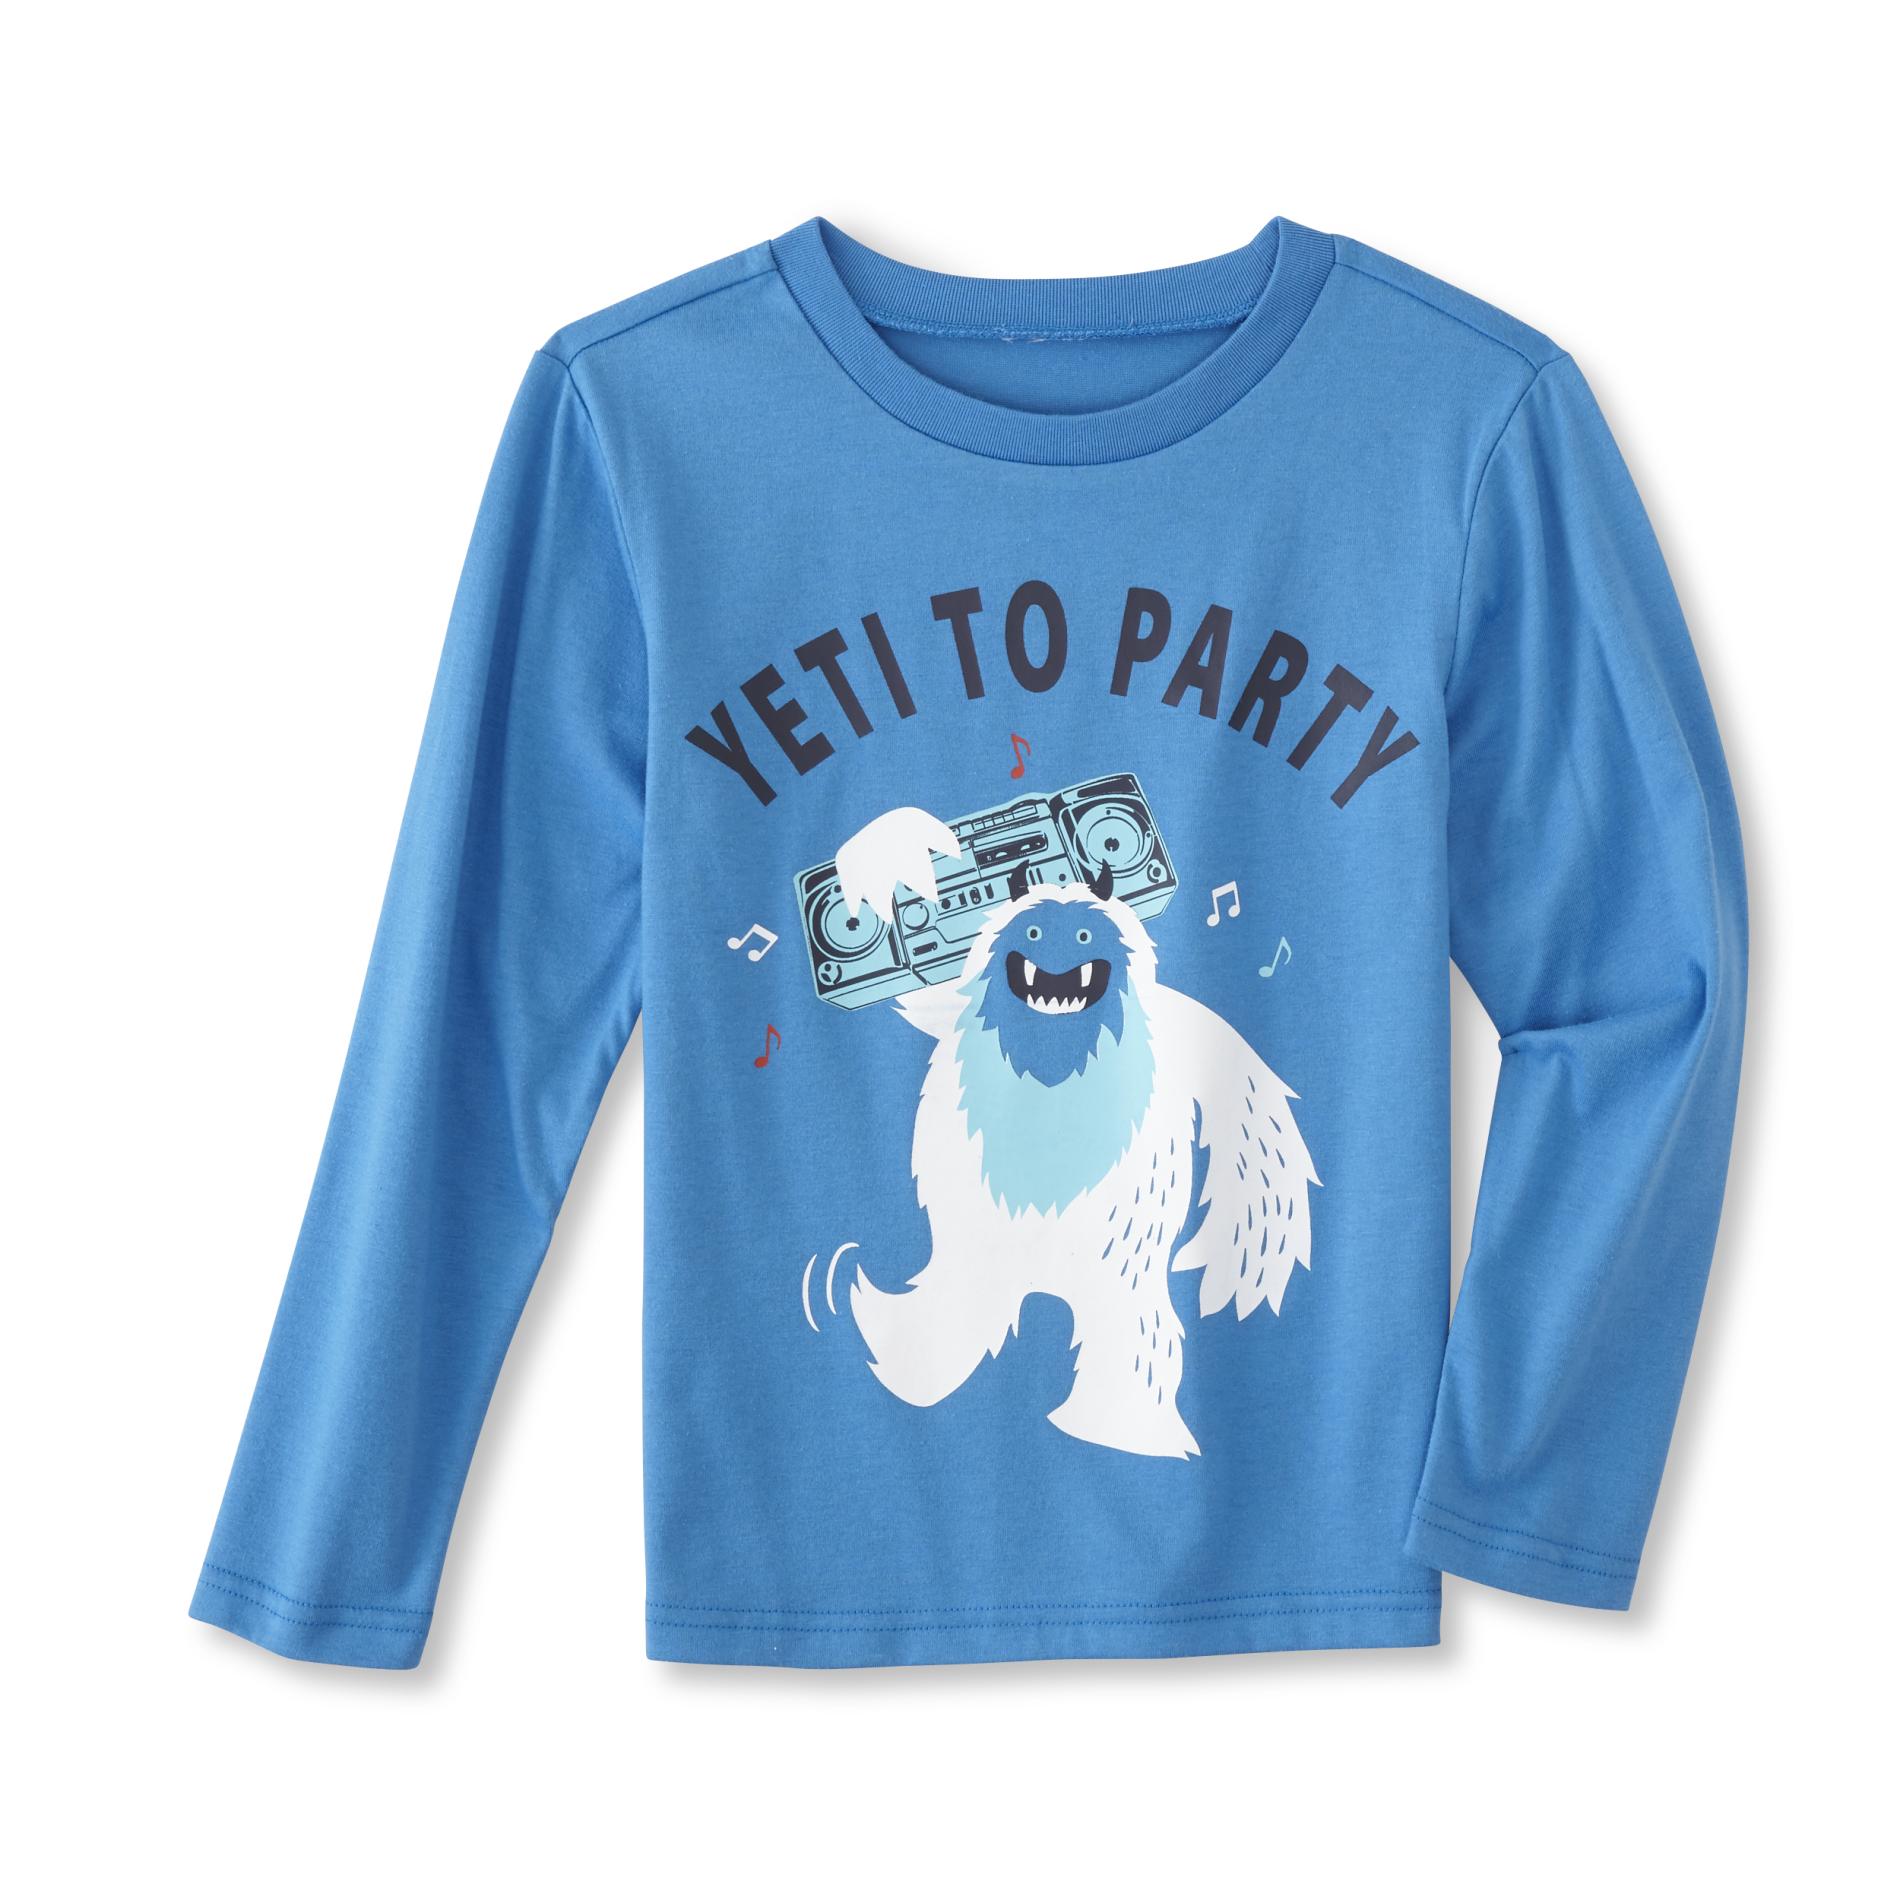 Toughskins Infant & Toddler Boys' Long-Sleeve Graphic T-Shirt - Yeti To Party